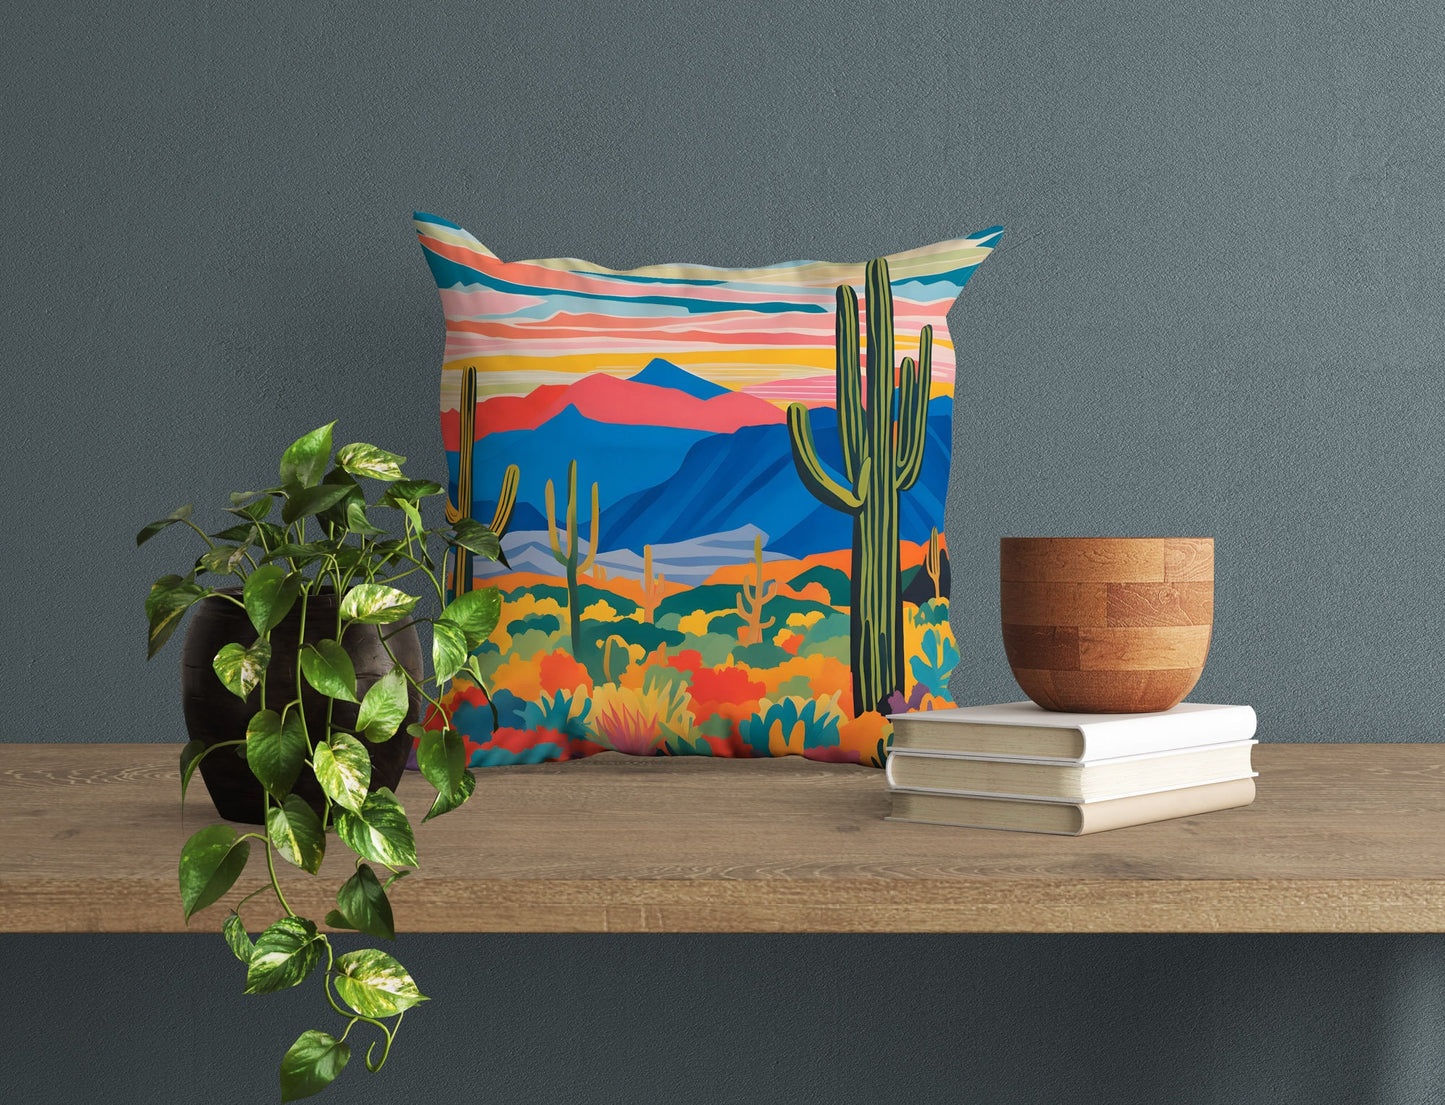 Guadalupe Mountains National Park Tapestry Pillows, Usa Travel Pillow, Colorful Pillow Case, Contemporary Pillow, Square Pillow